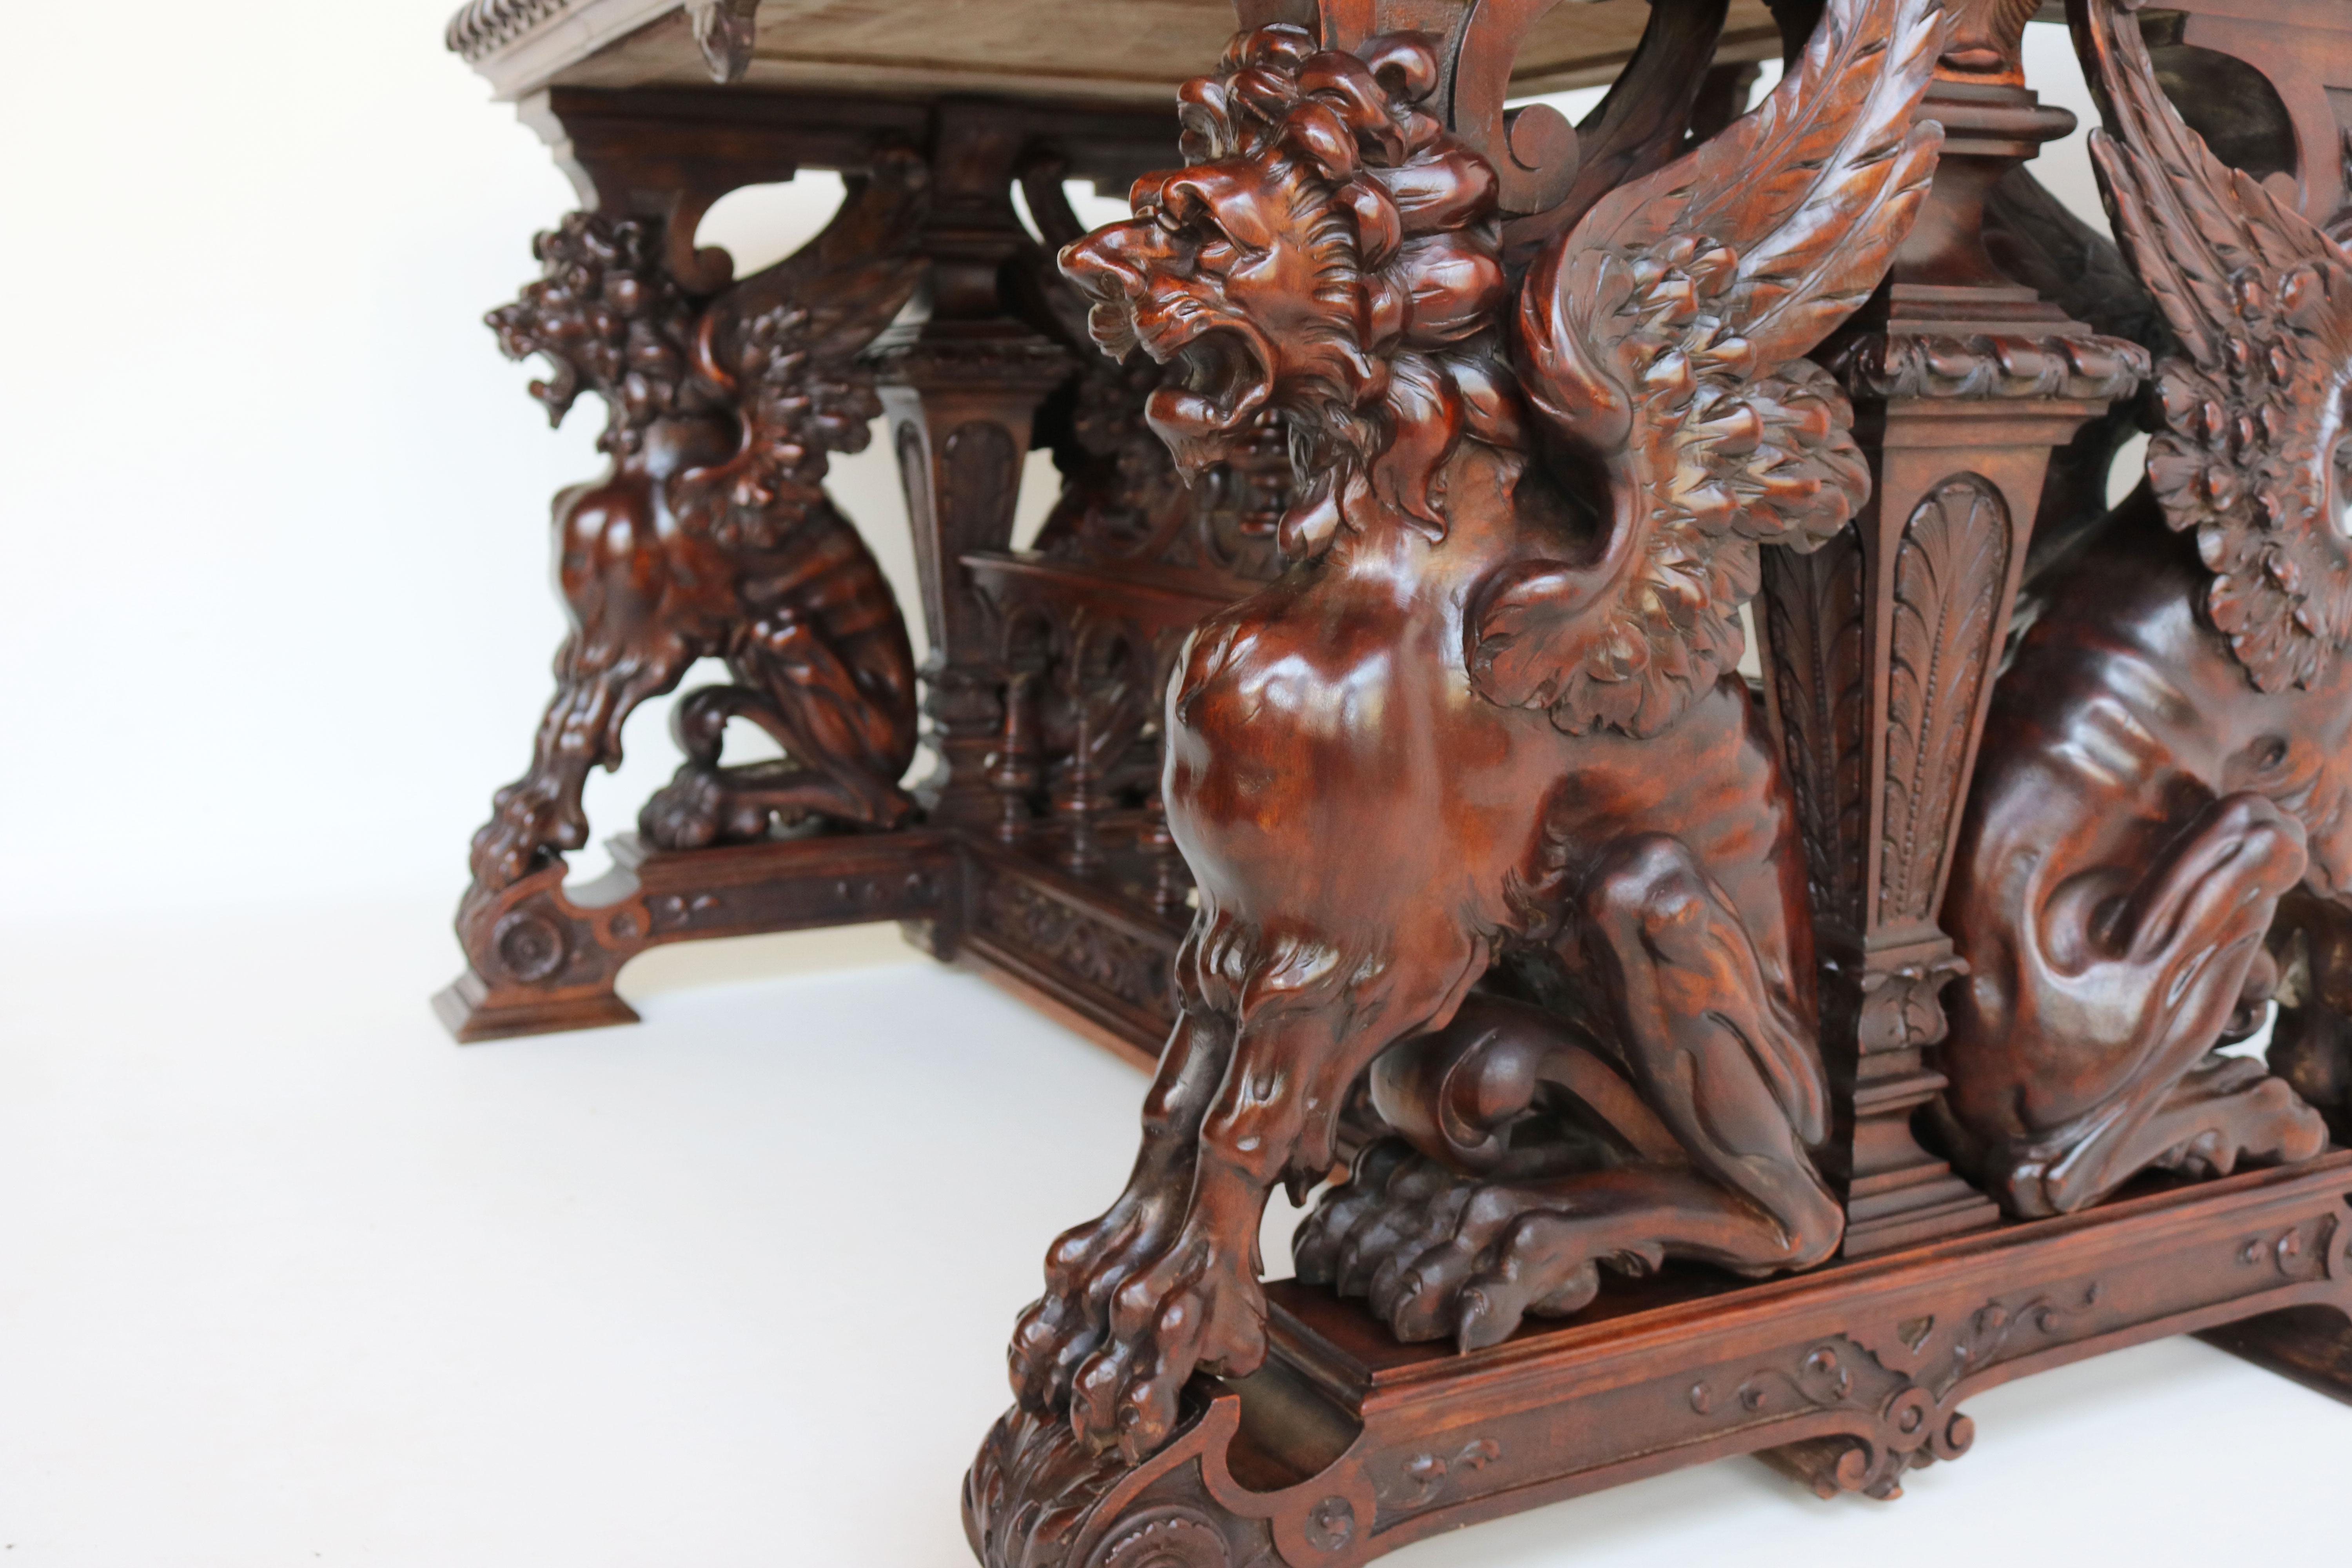 This exquisite Renaissance writing table / desk by Victor Aimone was crafted in 1890 from solid walnut wood. It features four stunning Gryphons that have been masterfully carved into the woodwork, they are completely free standing openly carved and